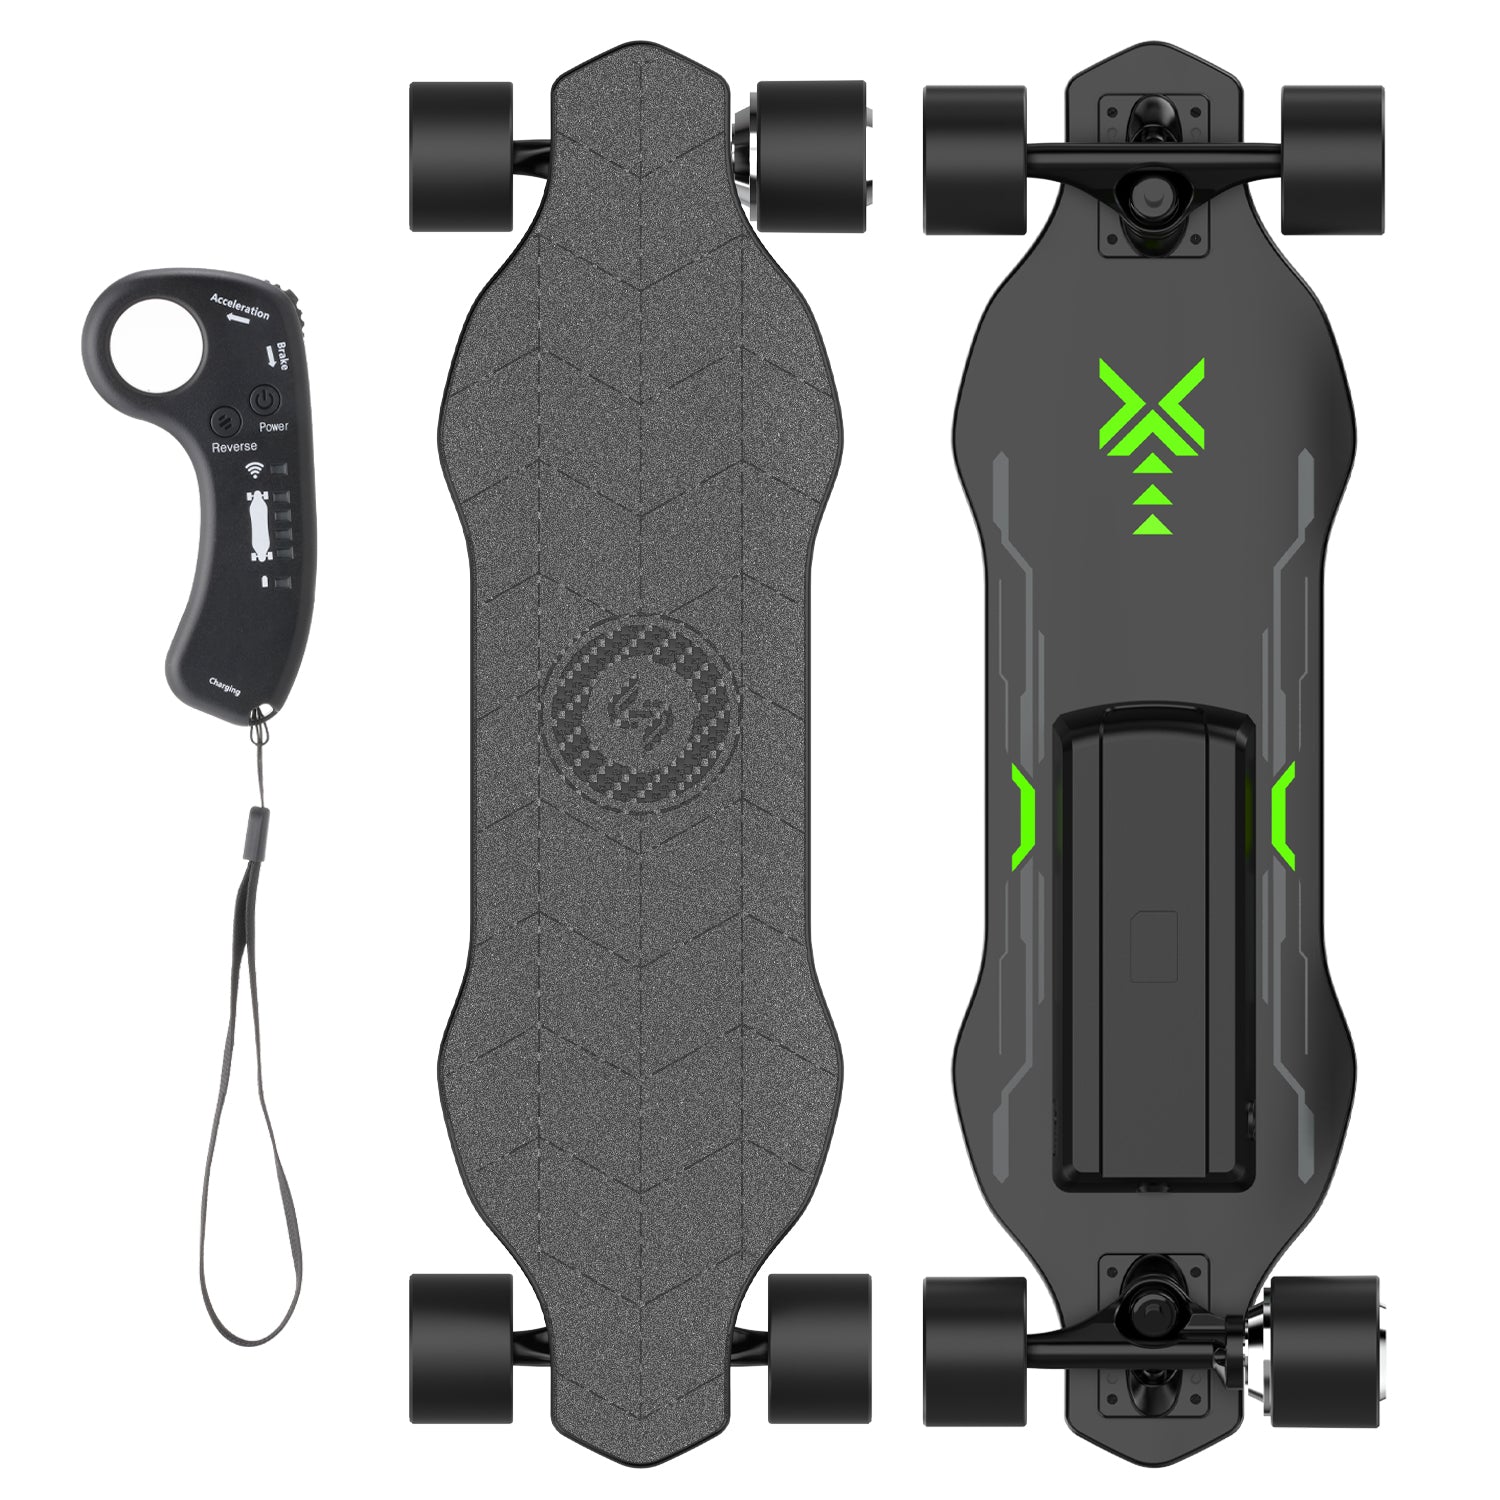 V6 Electric Skateboard with Remote Control